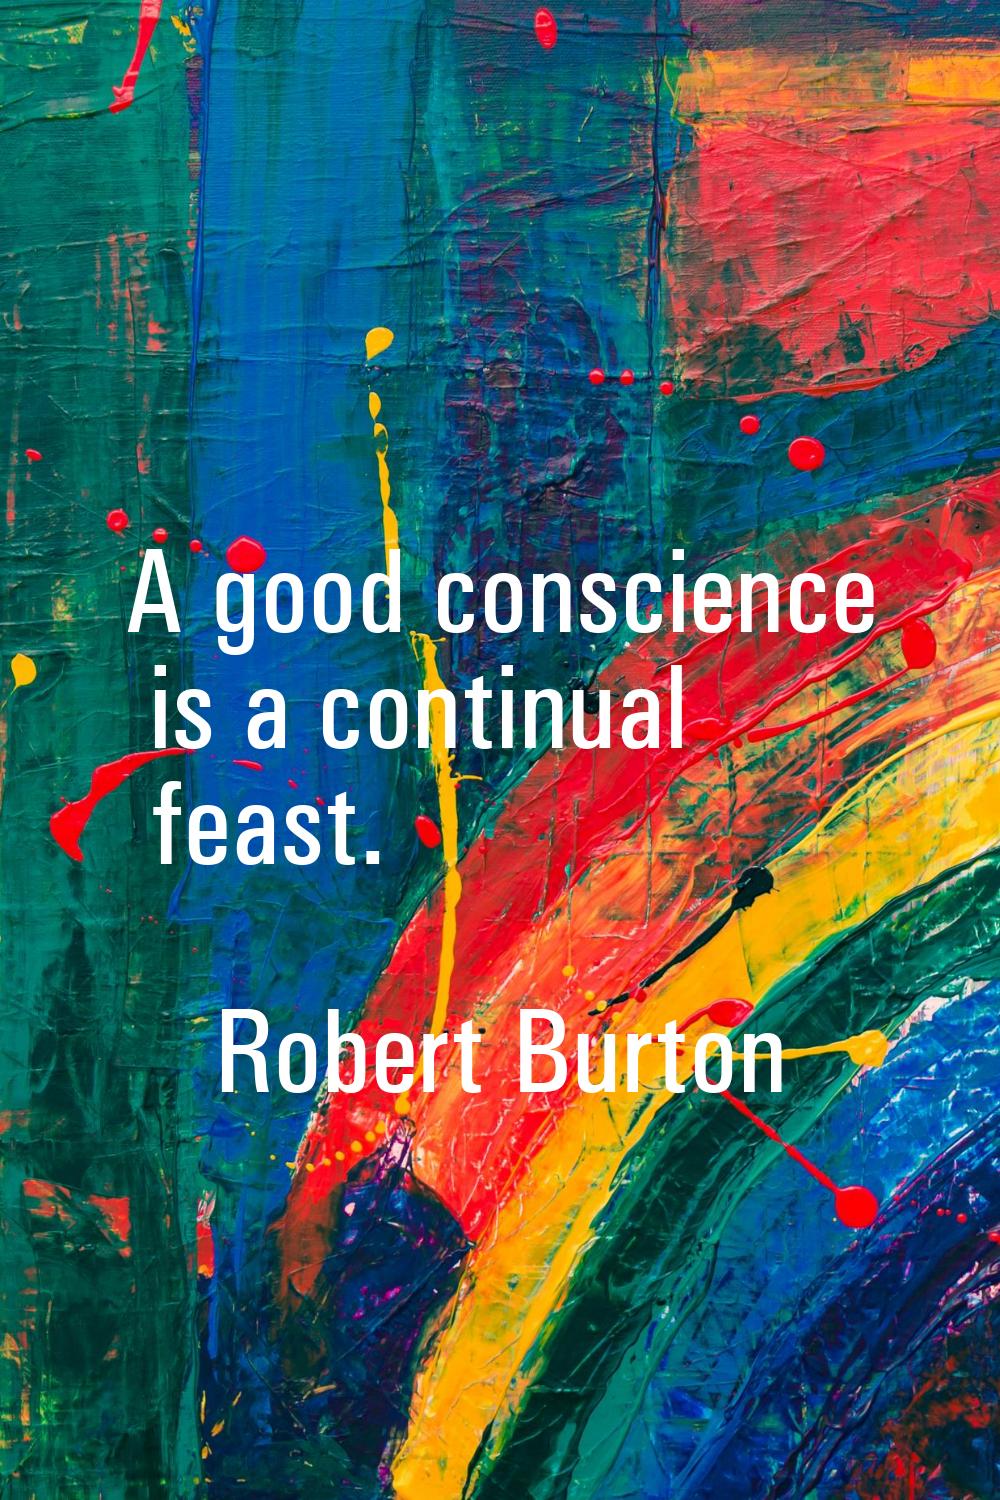 A good conscience is a continual feast.